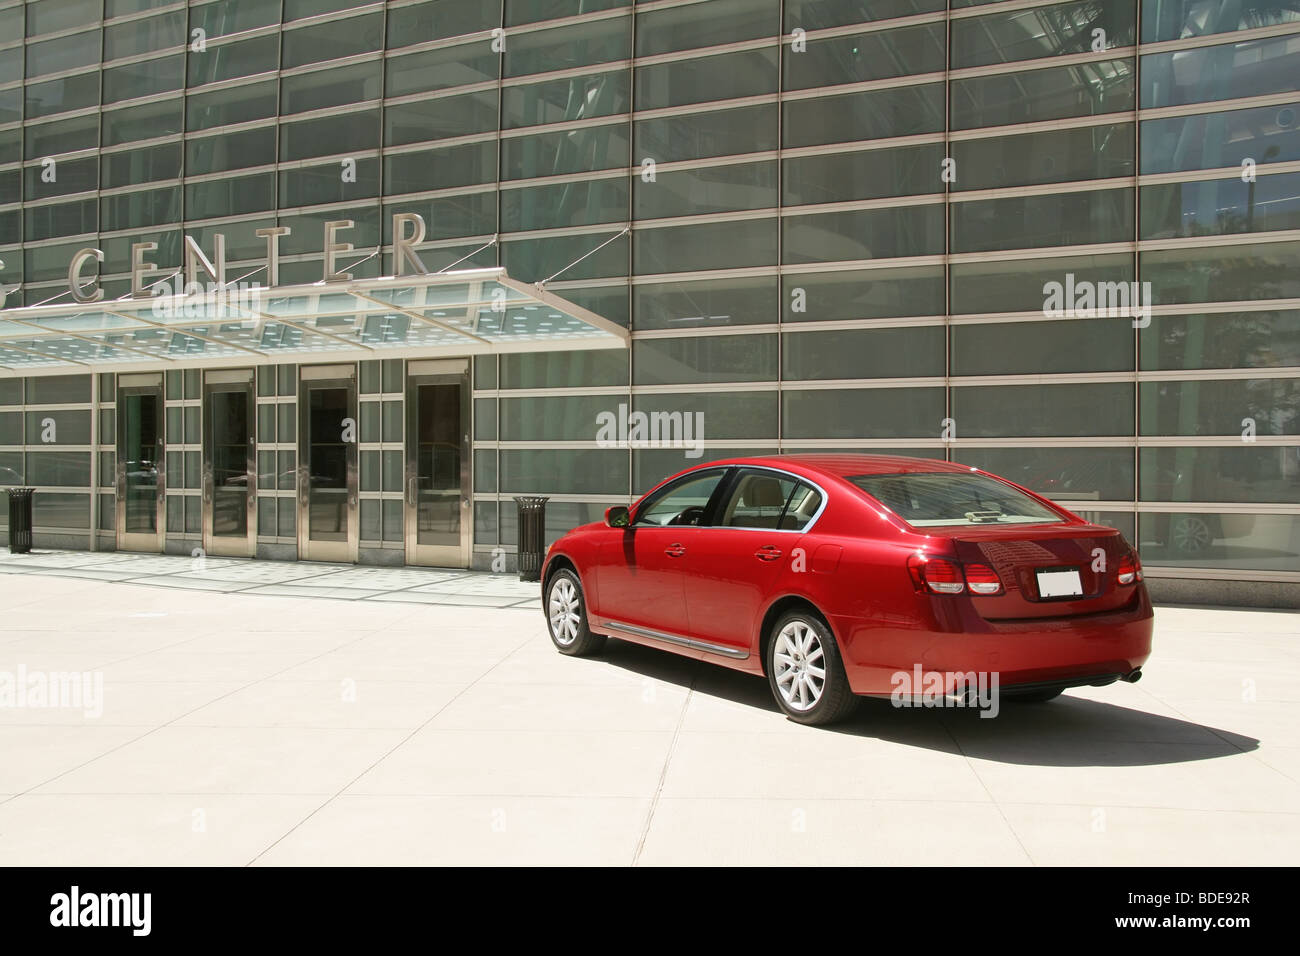 Red Lexus At Glass Building Lexus Gs300 Logos And Badges Removed From Car Stock Photo Alamy